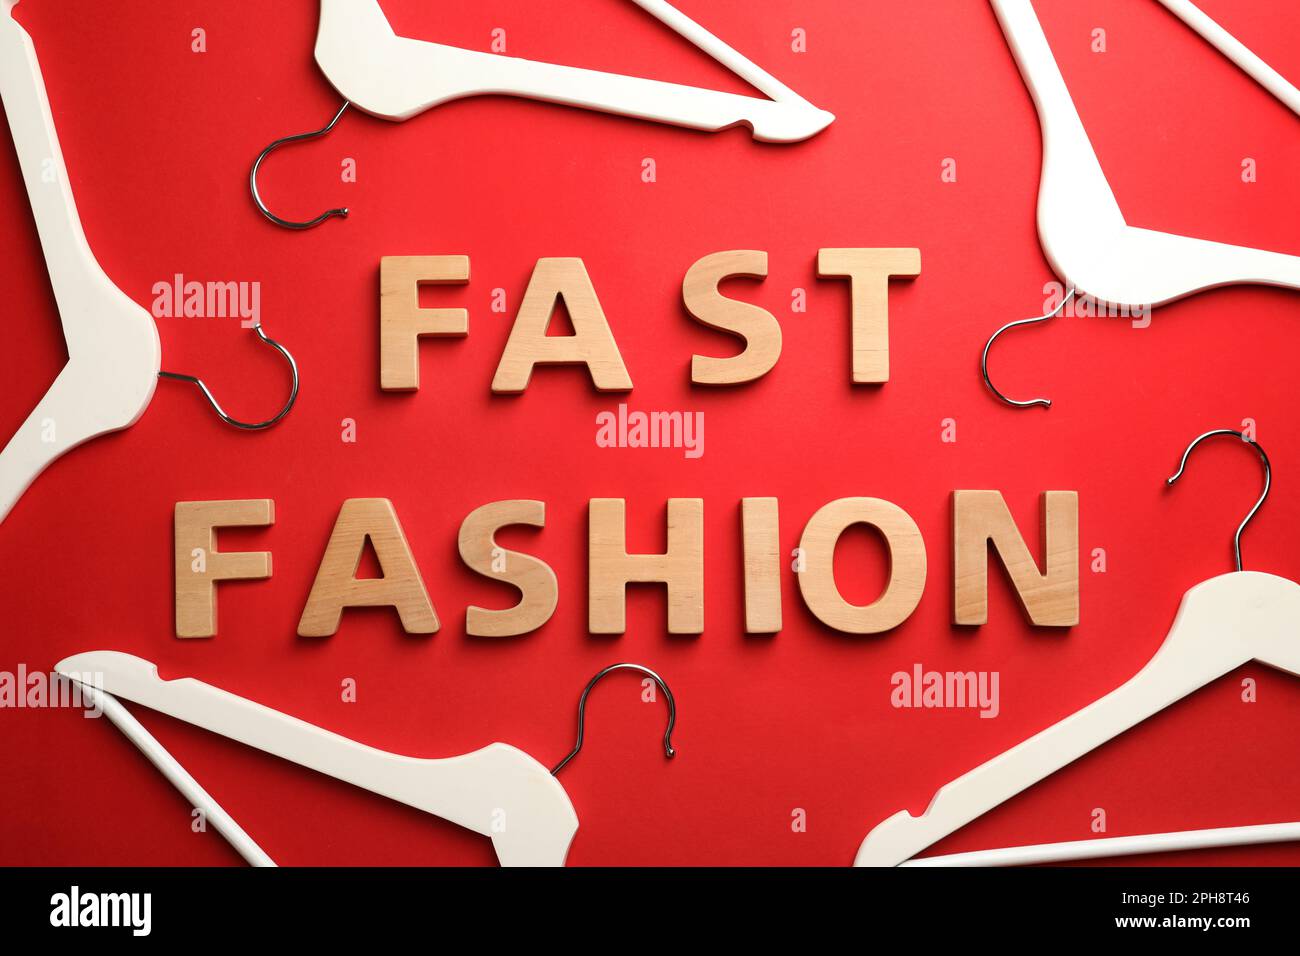 Phrase FAST FASHION made of wooden letters and white hangers on red background, flat lay Stock Photo